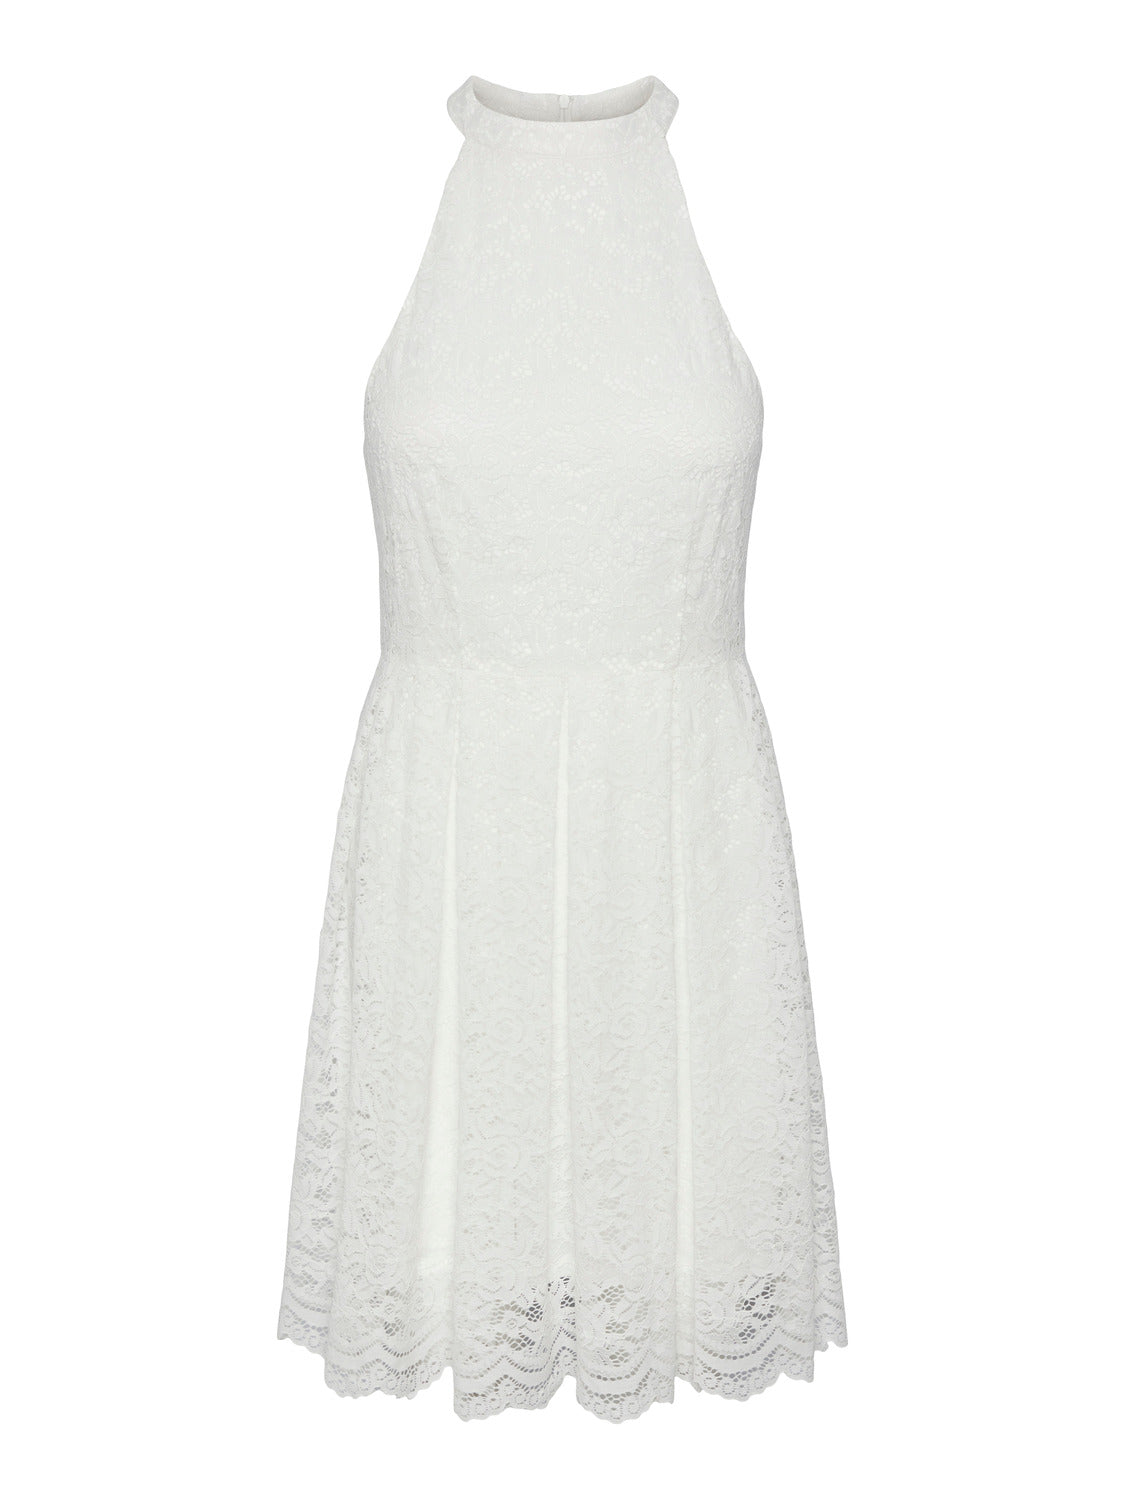 PCLUCY Dress - Bright White